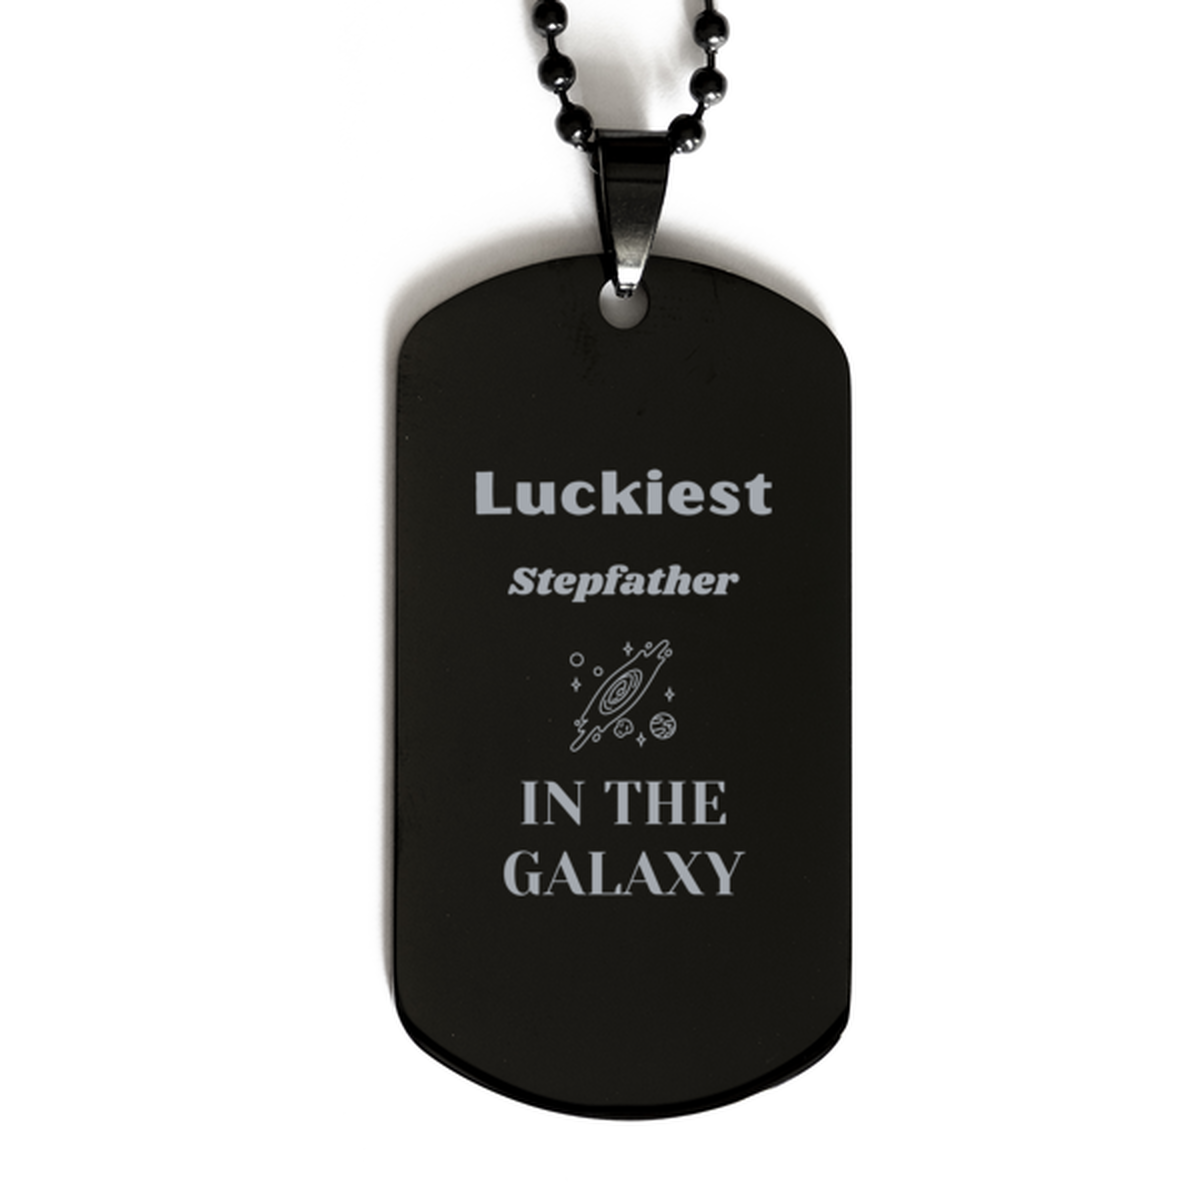 Luckiest Stepfather in the Galaxy, To My Stepfather Engraved Gifts, Christmas Stepfather Black Dog Tag Gifts, X-mas Birthday Unique Gifts For Stepfather Men Women